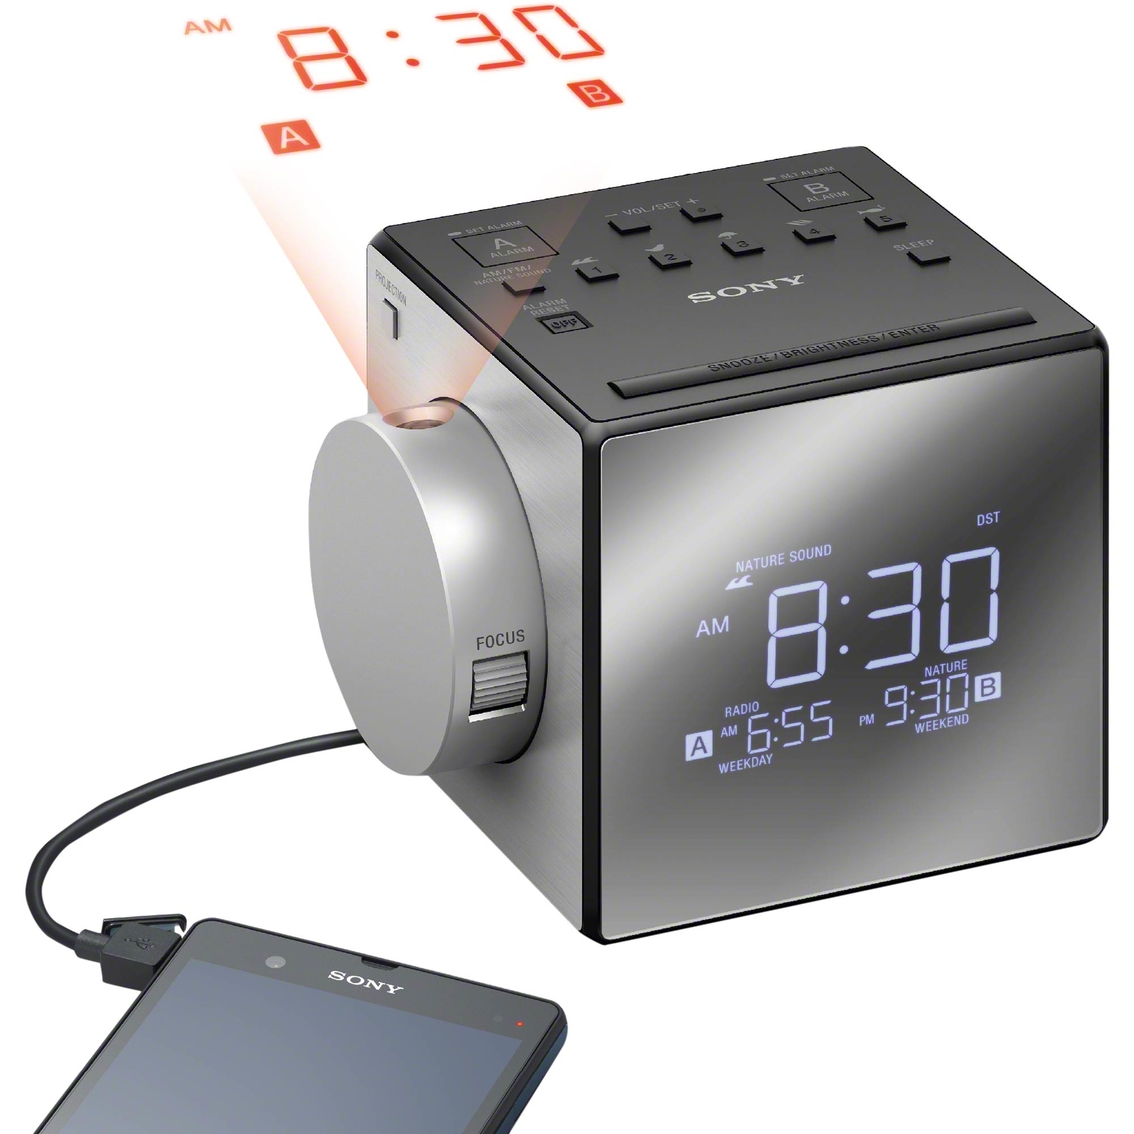 Sony Alarm Clock Time Projector - Image 2 of 2